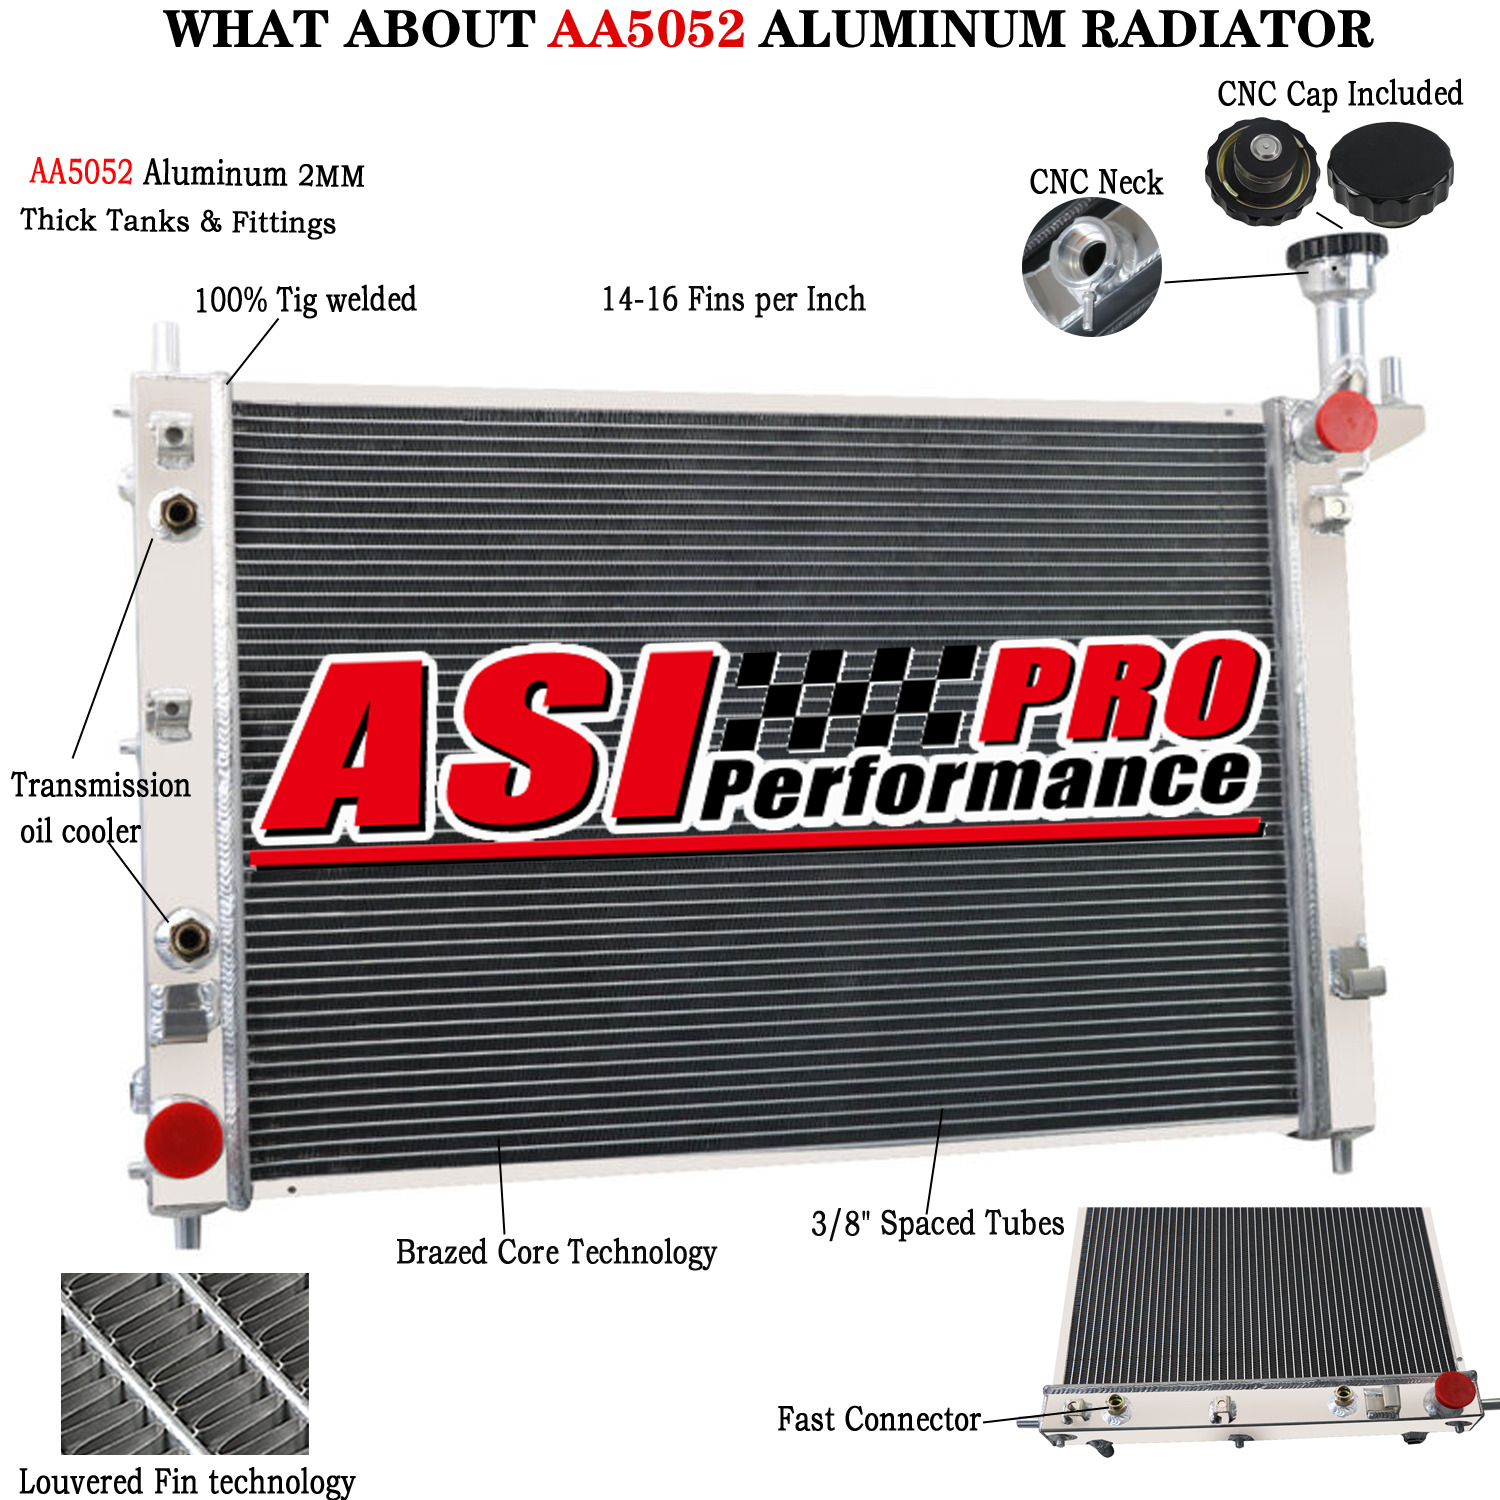 Aluminum Radiator For 2007-2017 16 GMC Acadia Chevy Traverse Buick Enclave 3.6L